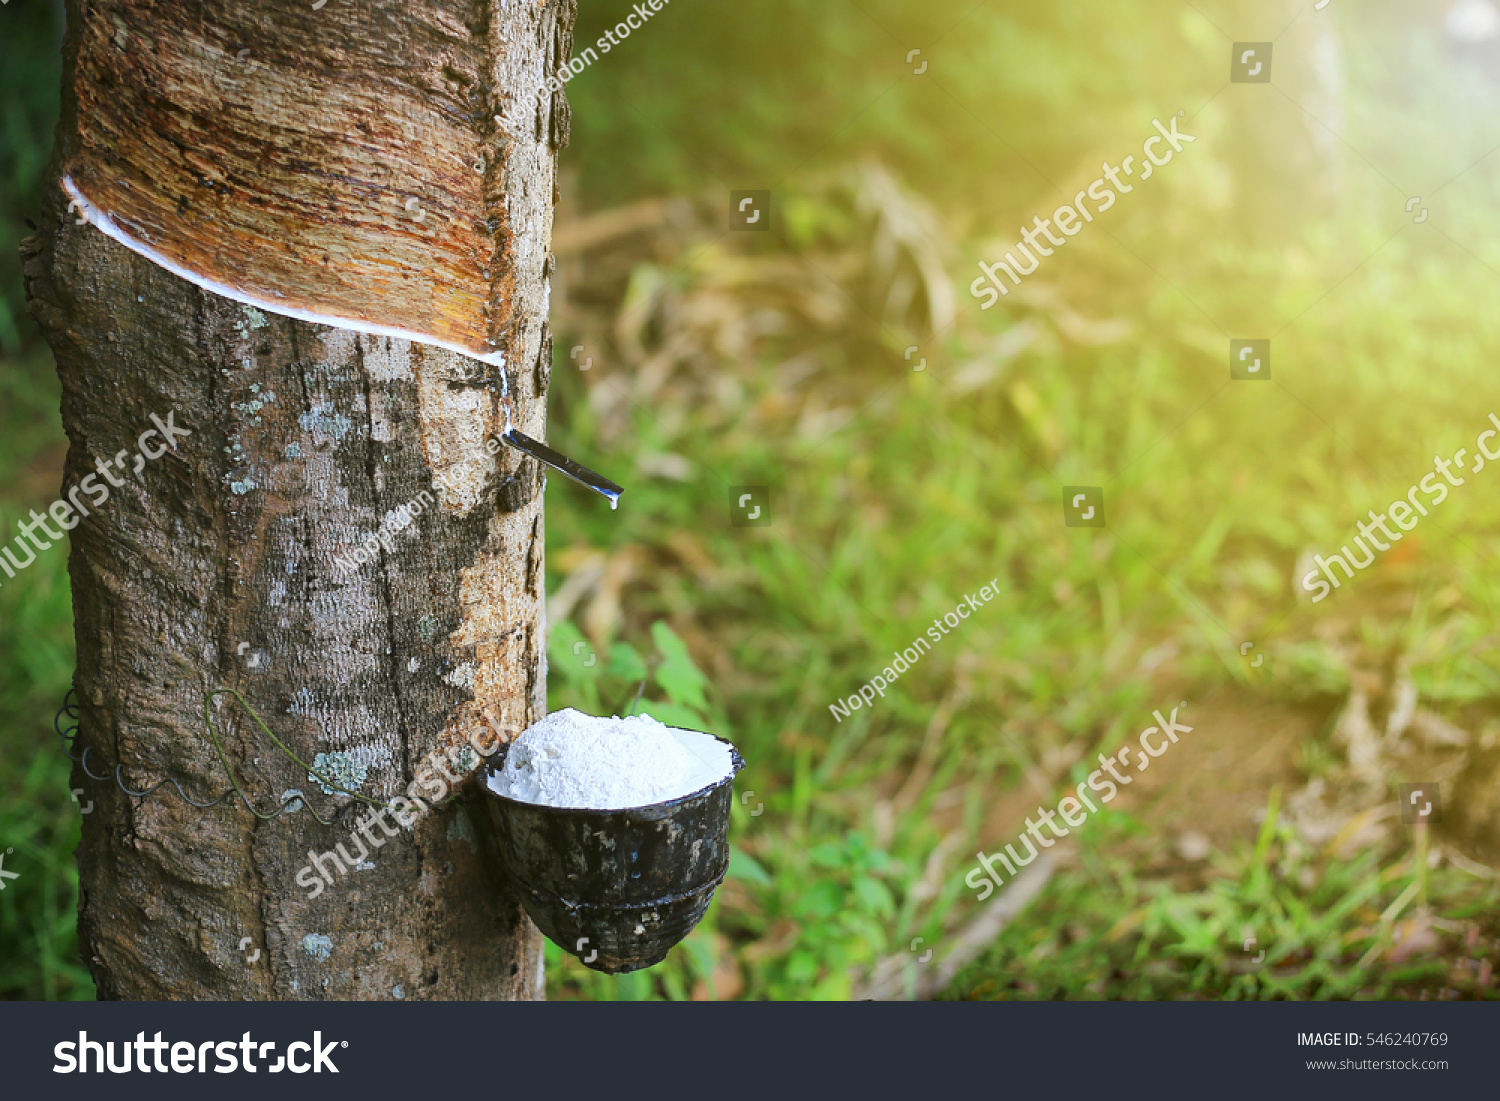 Rubber Latex extracted from rubber tree , (Hevea Brasiliensis) as a source of natural rubber #546240769